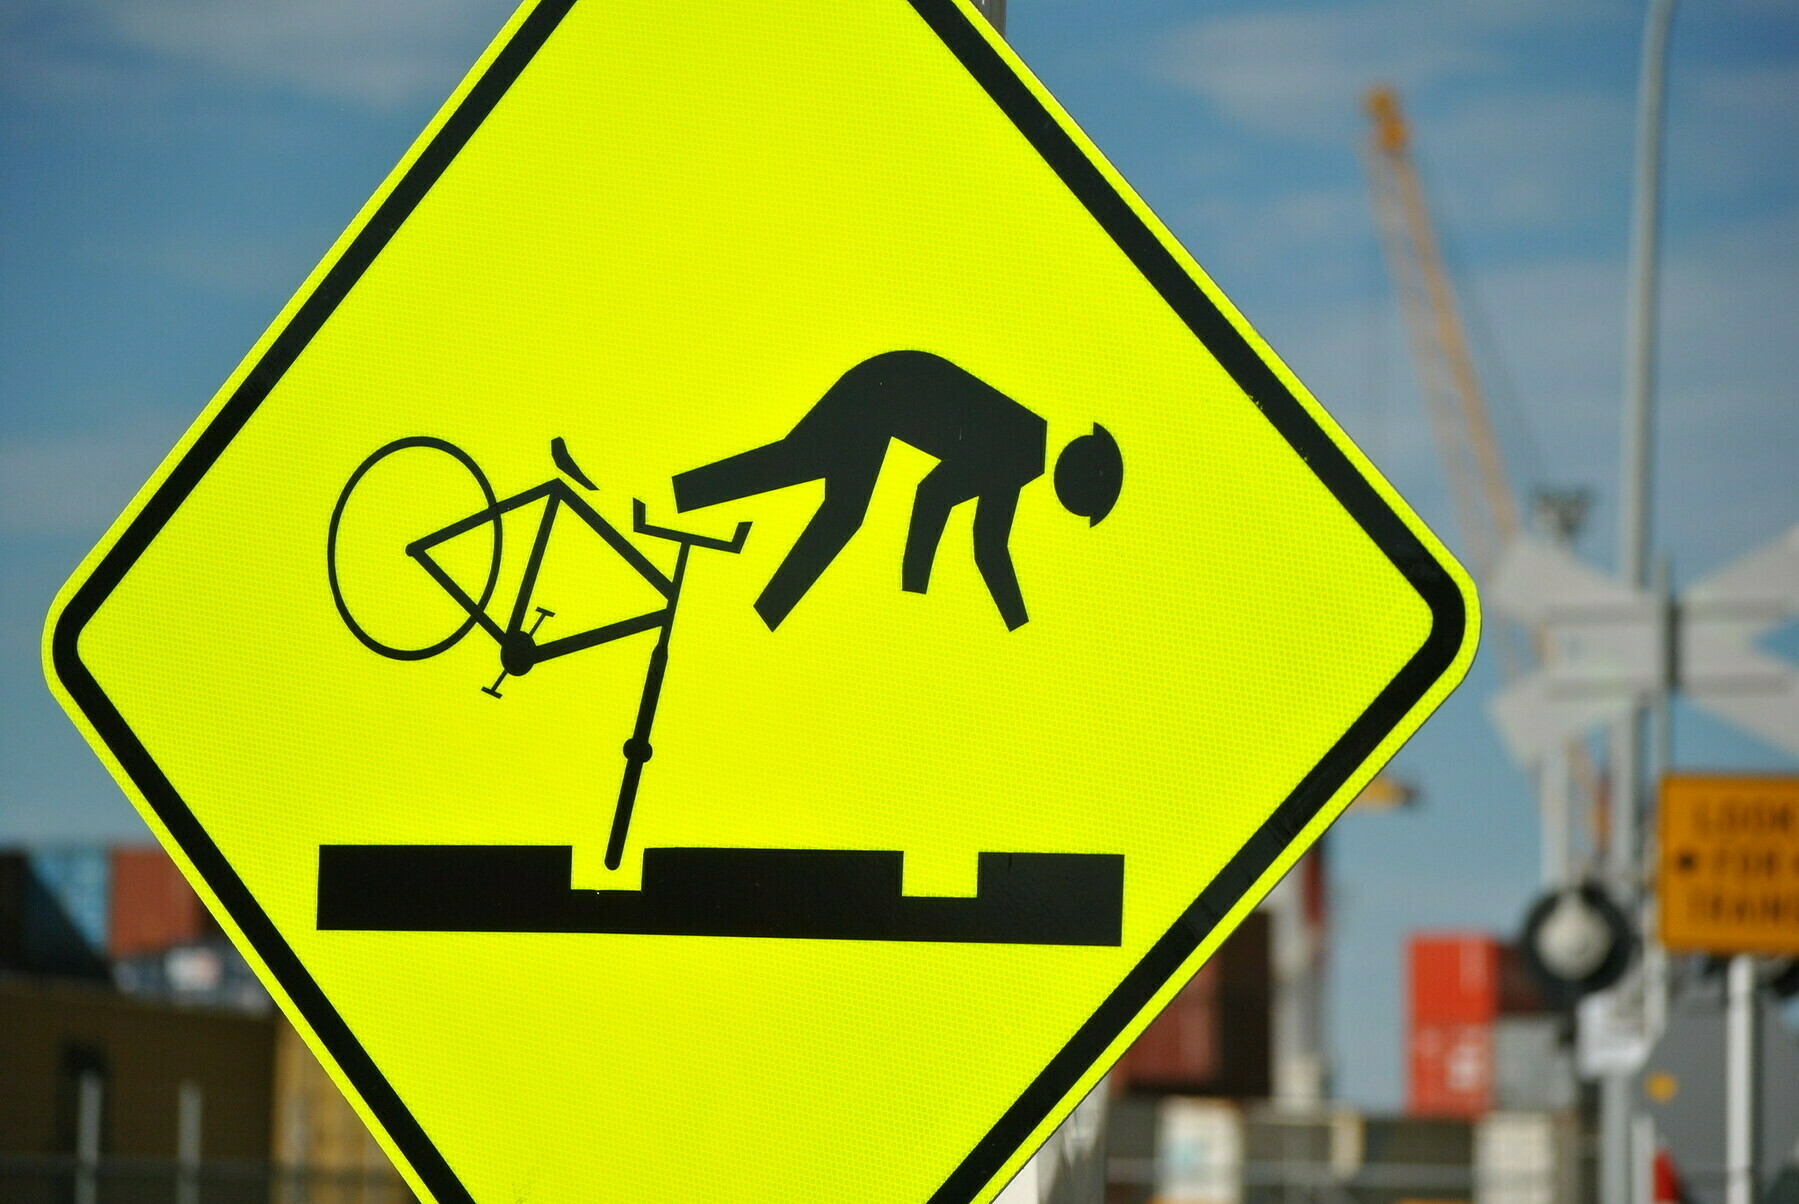 Diamond shaped yellow roadsign in focus with a person going over the handlebars of a bike that has it's wheel caught in a railway track.